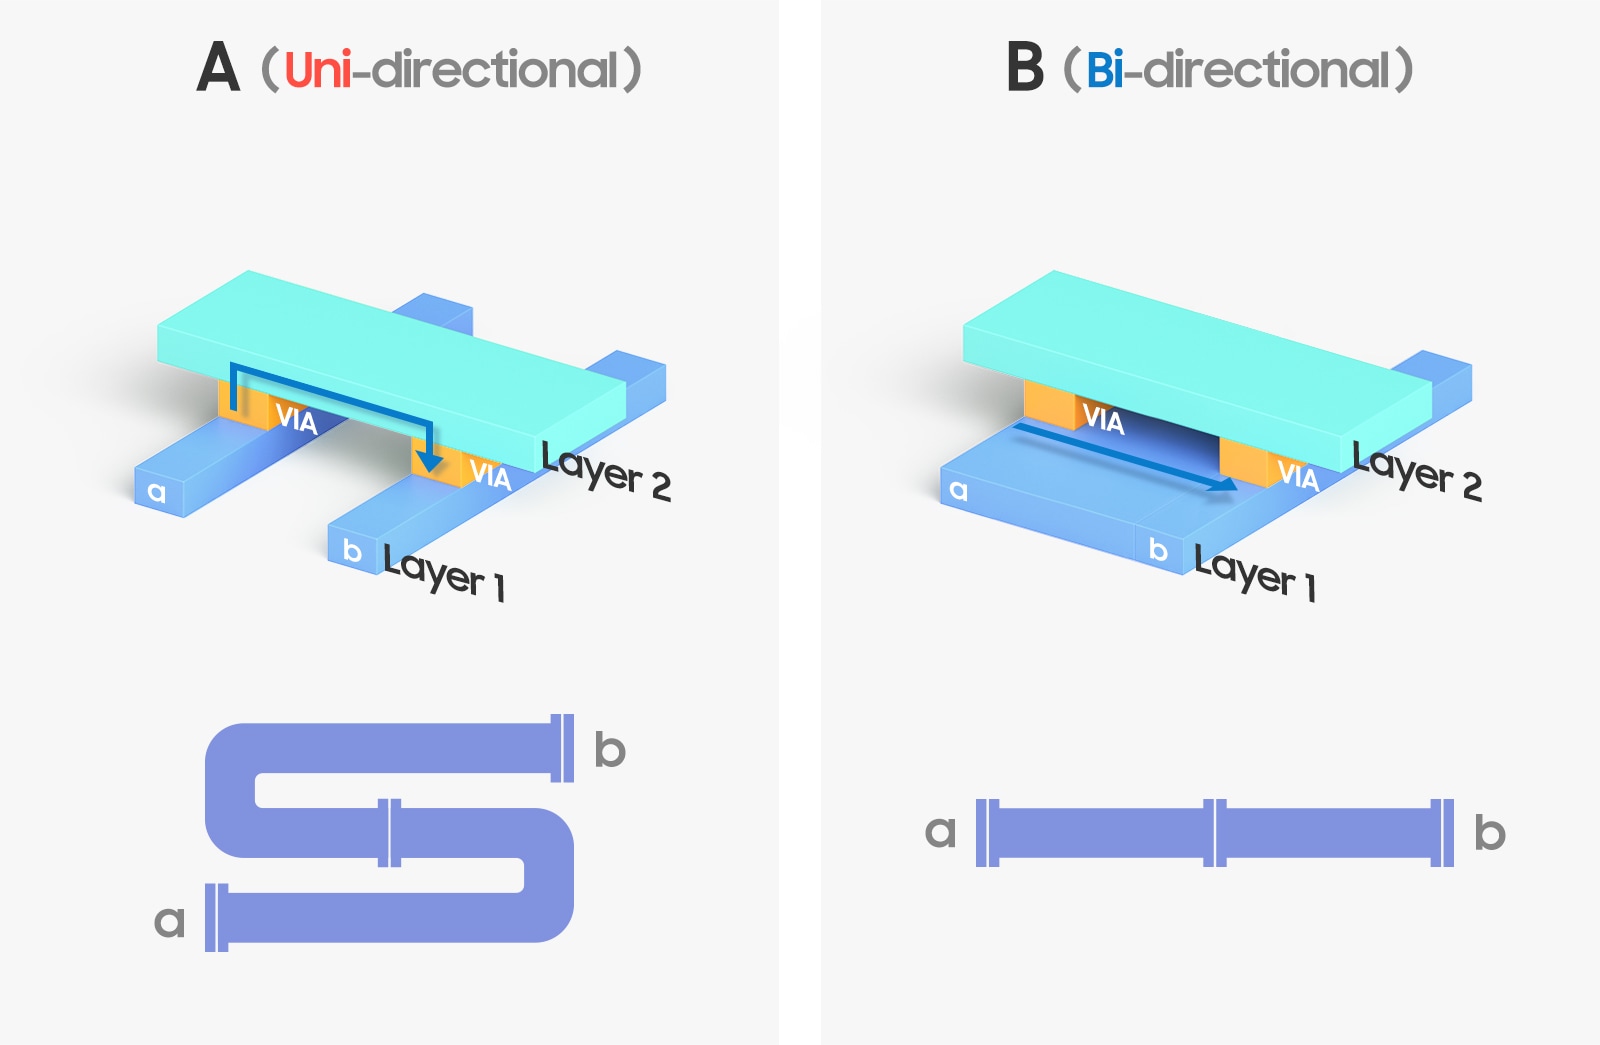 Fig. [7] A : Each layer providing uni-directional path, B : Bi-directional path provided